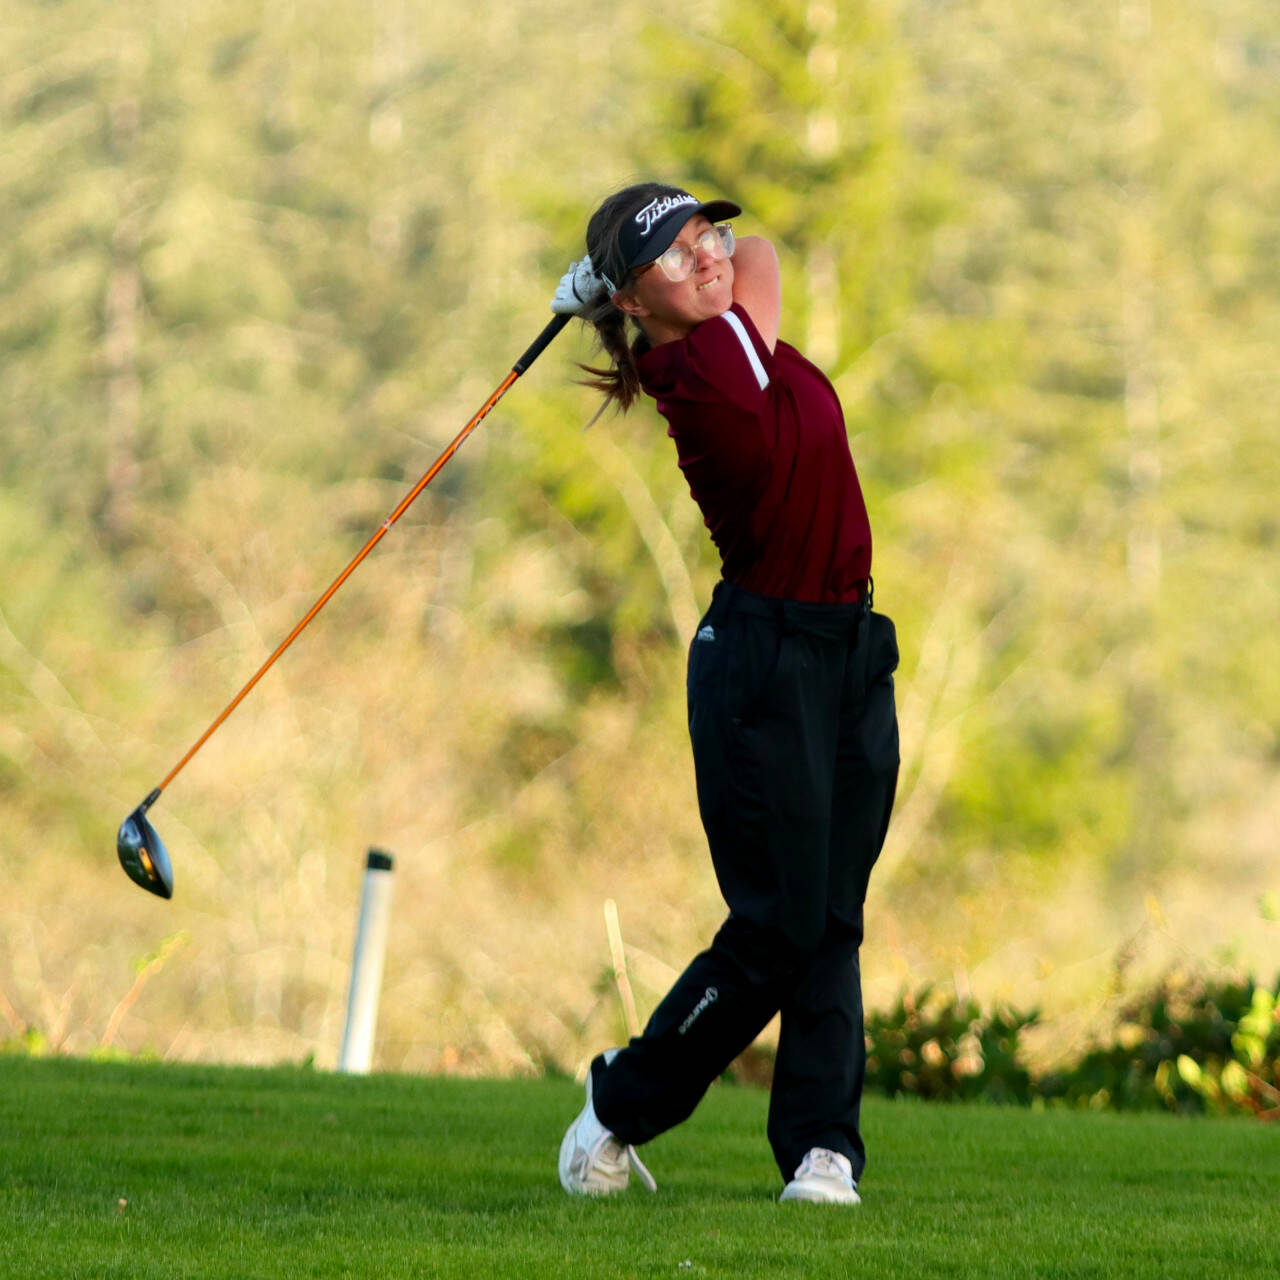 SUBMITTED PHOTO 
Defending state-champion Hailey Blancas shot a 39 in her nine-hole round to lead Montesano to a victory over Hoquiam on Wednesday at the Grays Harbor Country Club in Aberdeen.